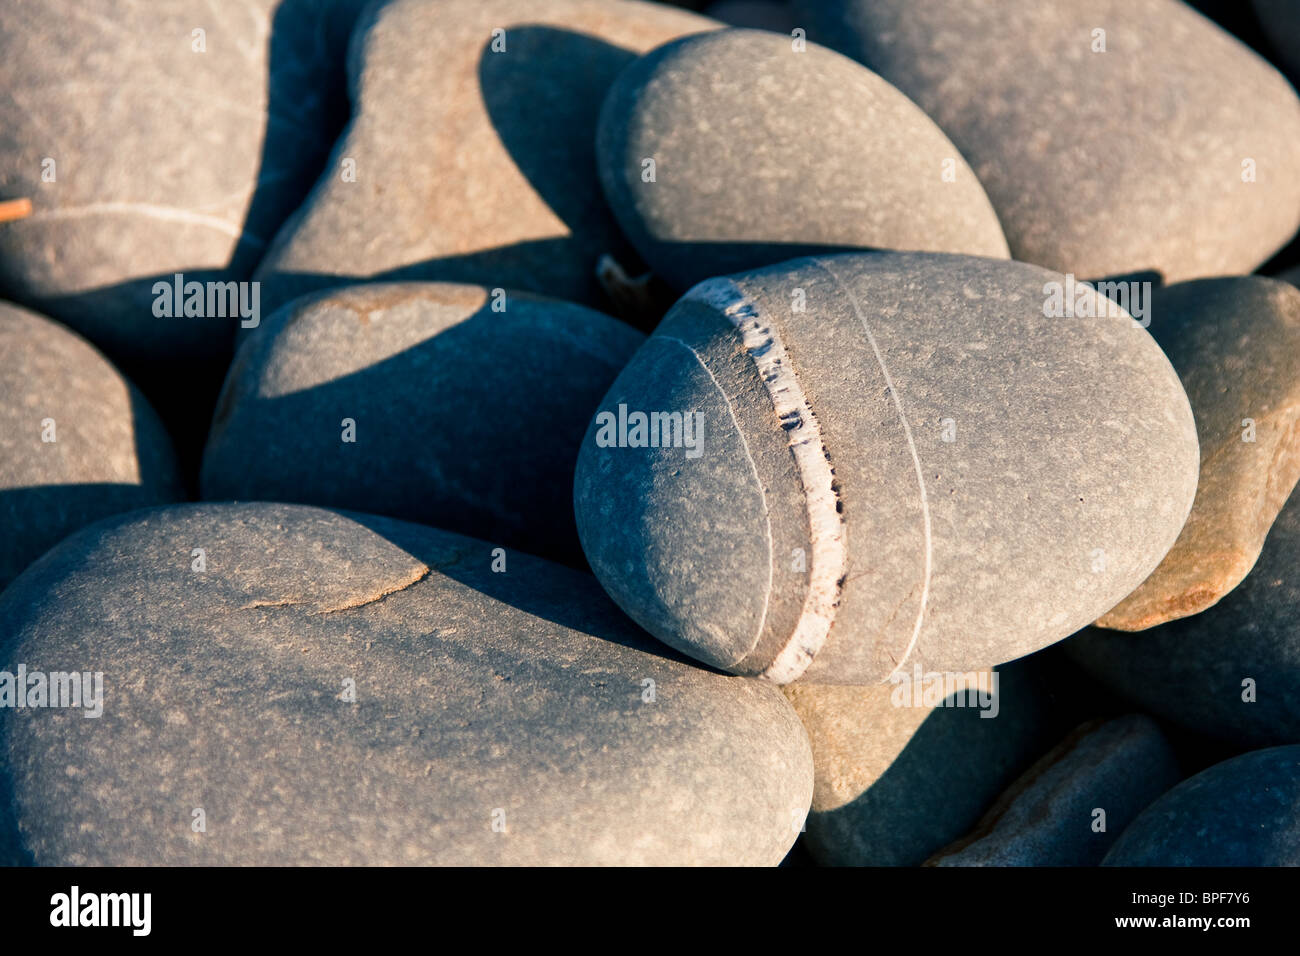 Close up of pebbles on a beach taken at sun set to give a lovely warm glow. Stock Photo